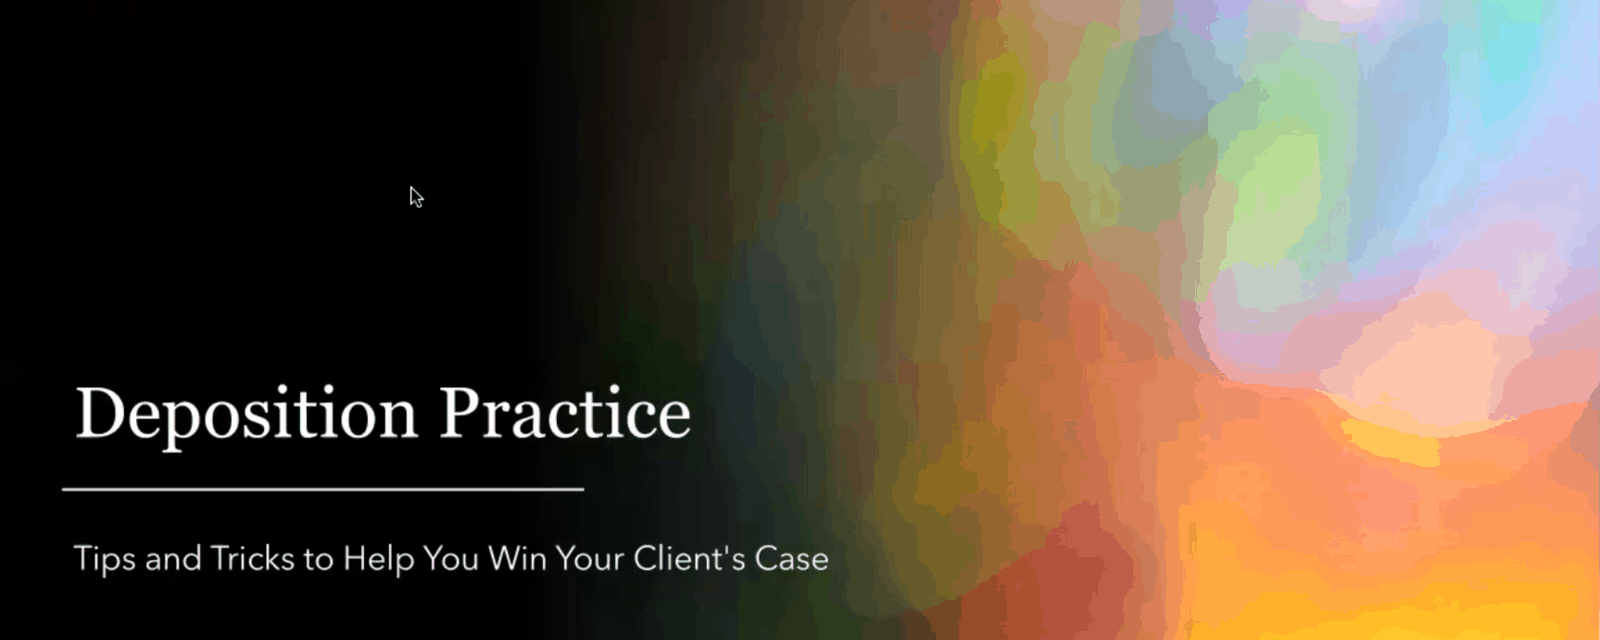 [9/3/20 Zoom Meeting] Deposition Practice: Tips and tricks to help you win your client’s case